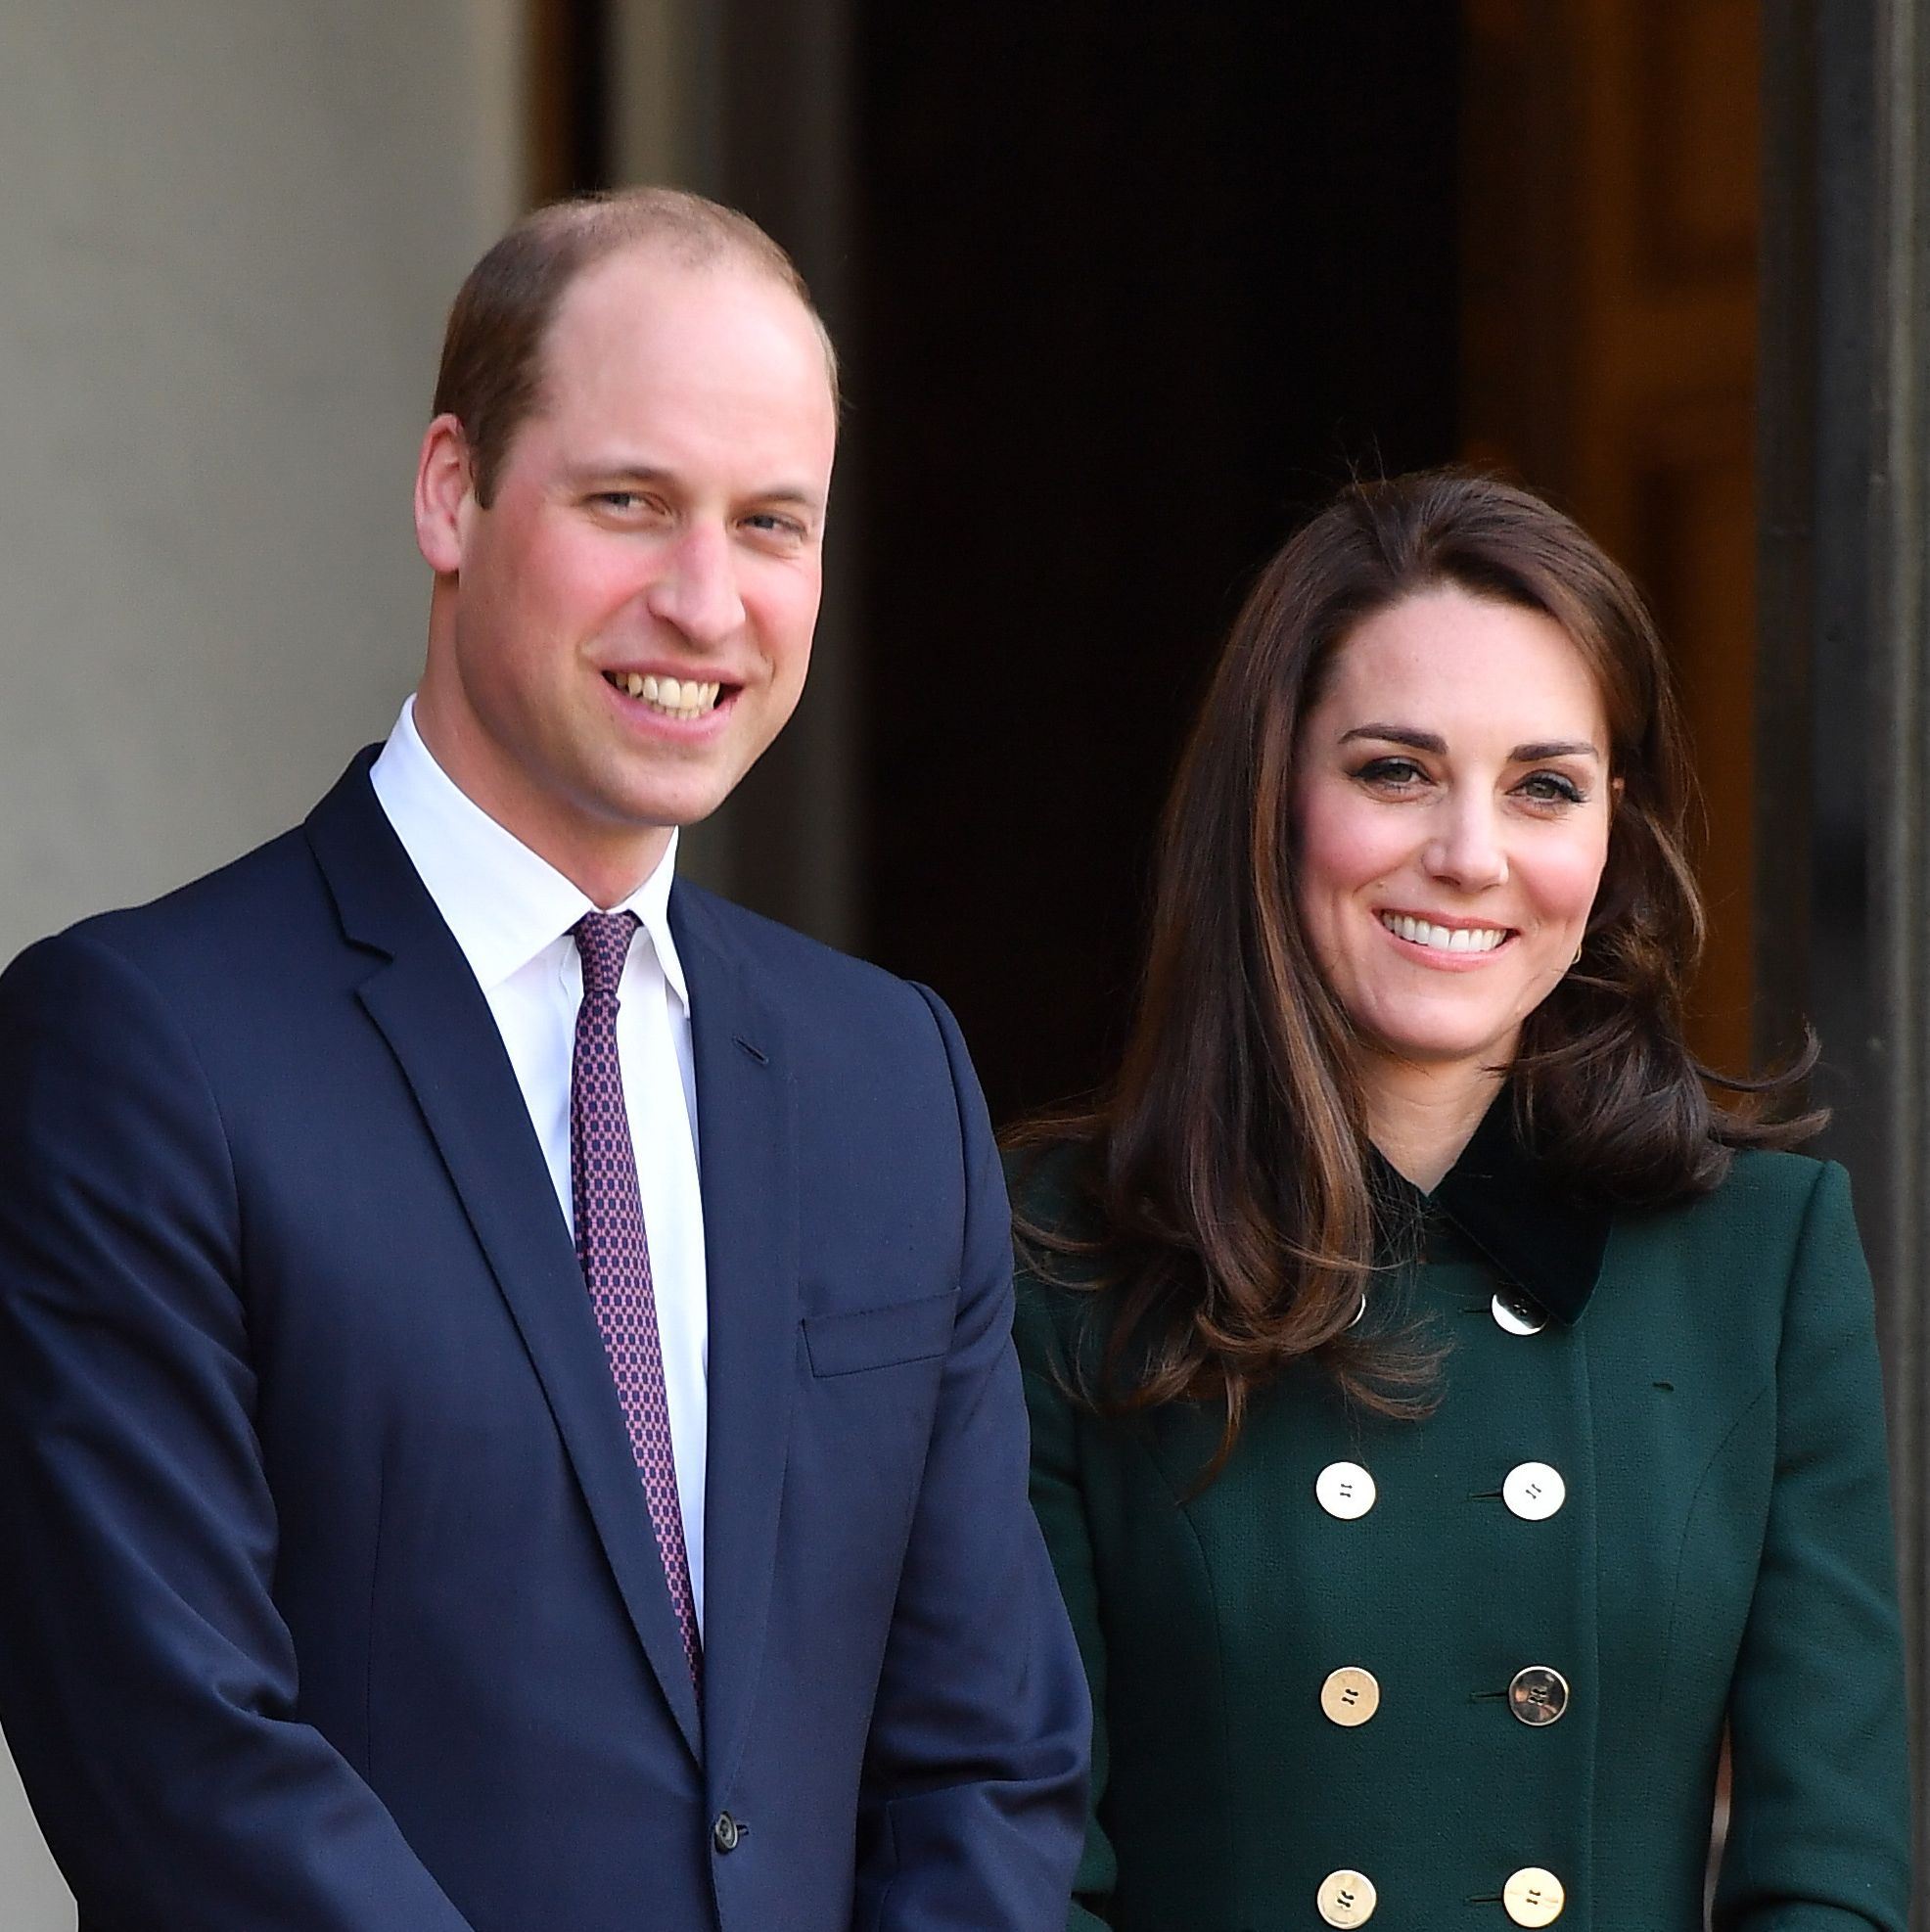 Inside the Massive Fortune That's About to Take Will and Kate's Wealth to the Next Level